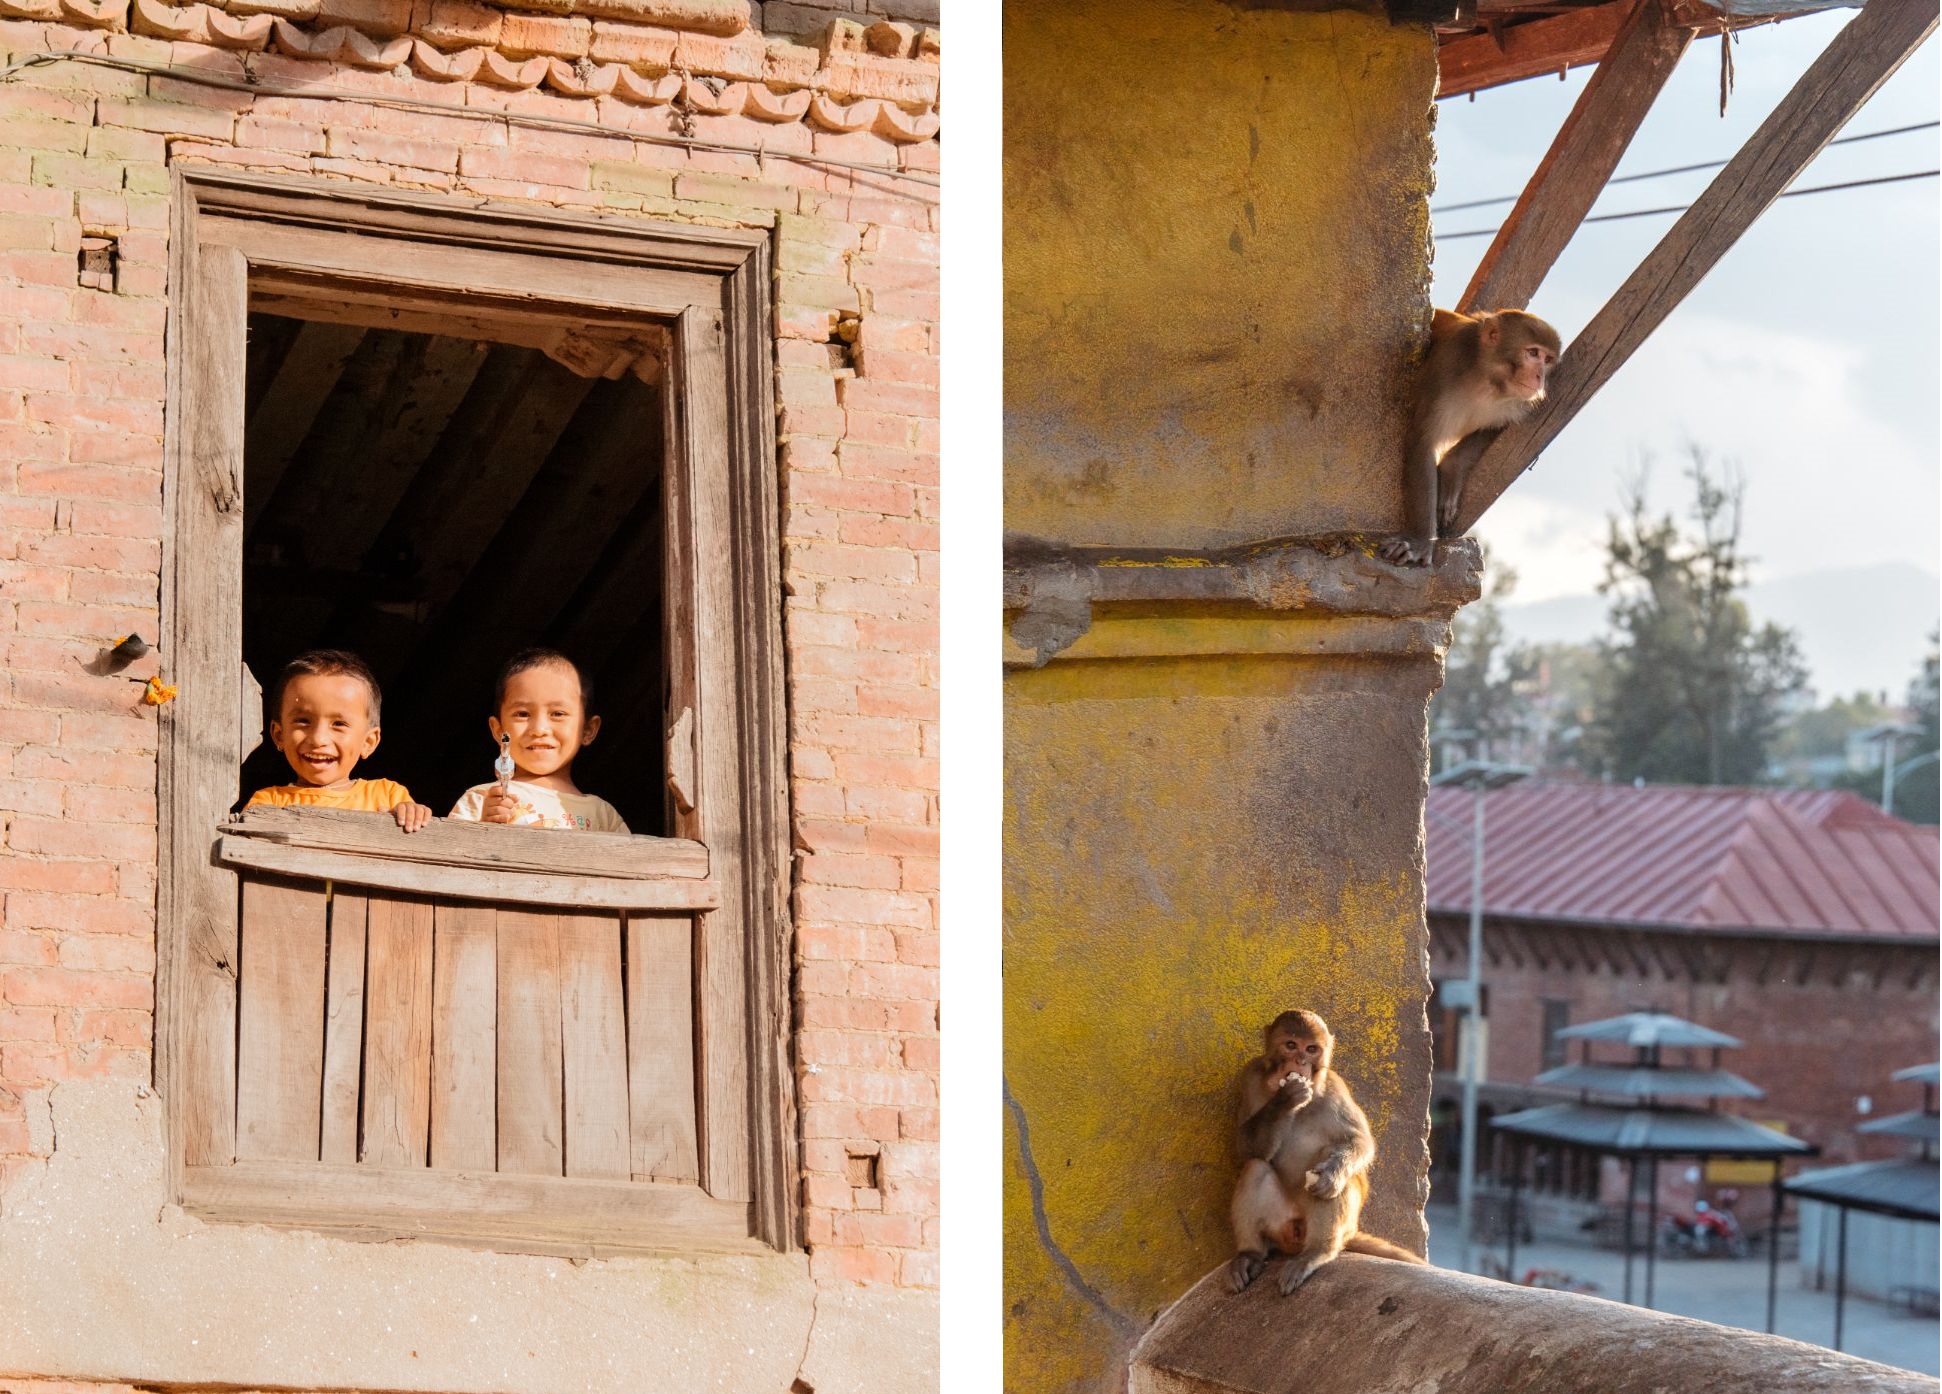 Two kids playing in a window (left), two monkeys in golden hour (right)